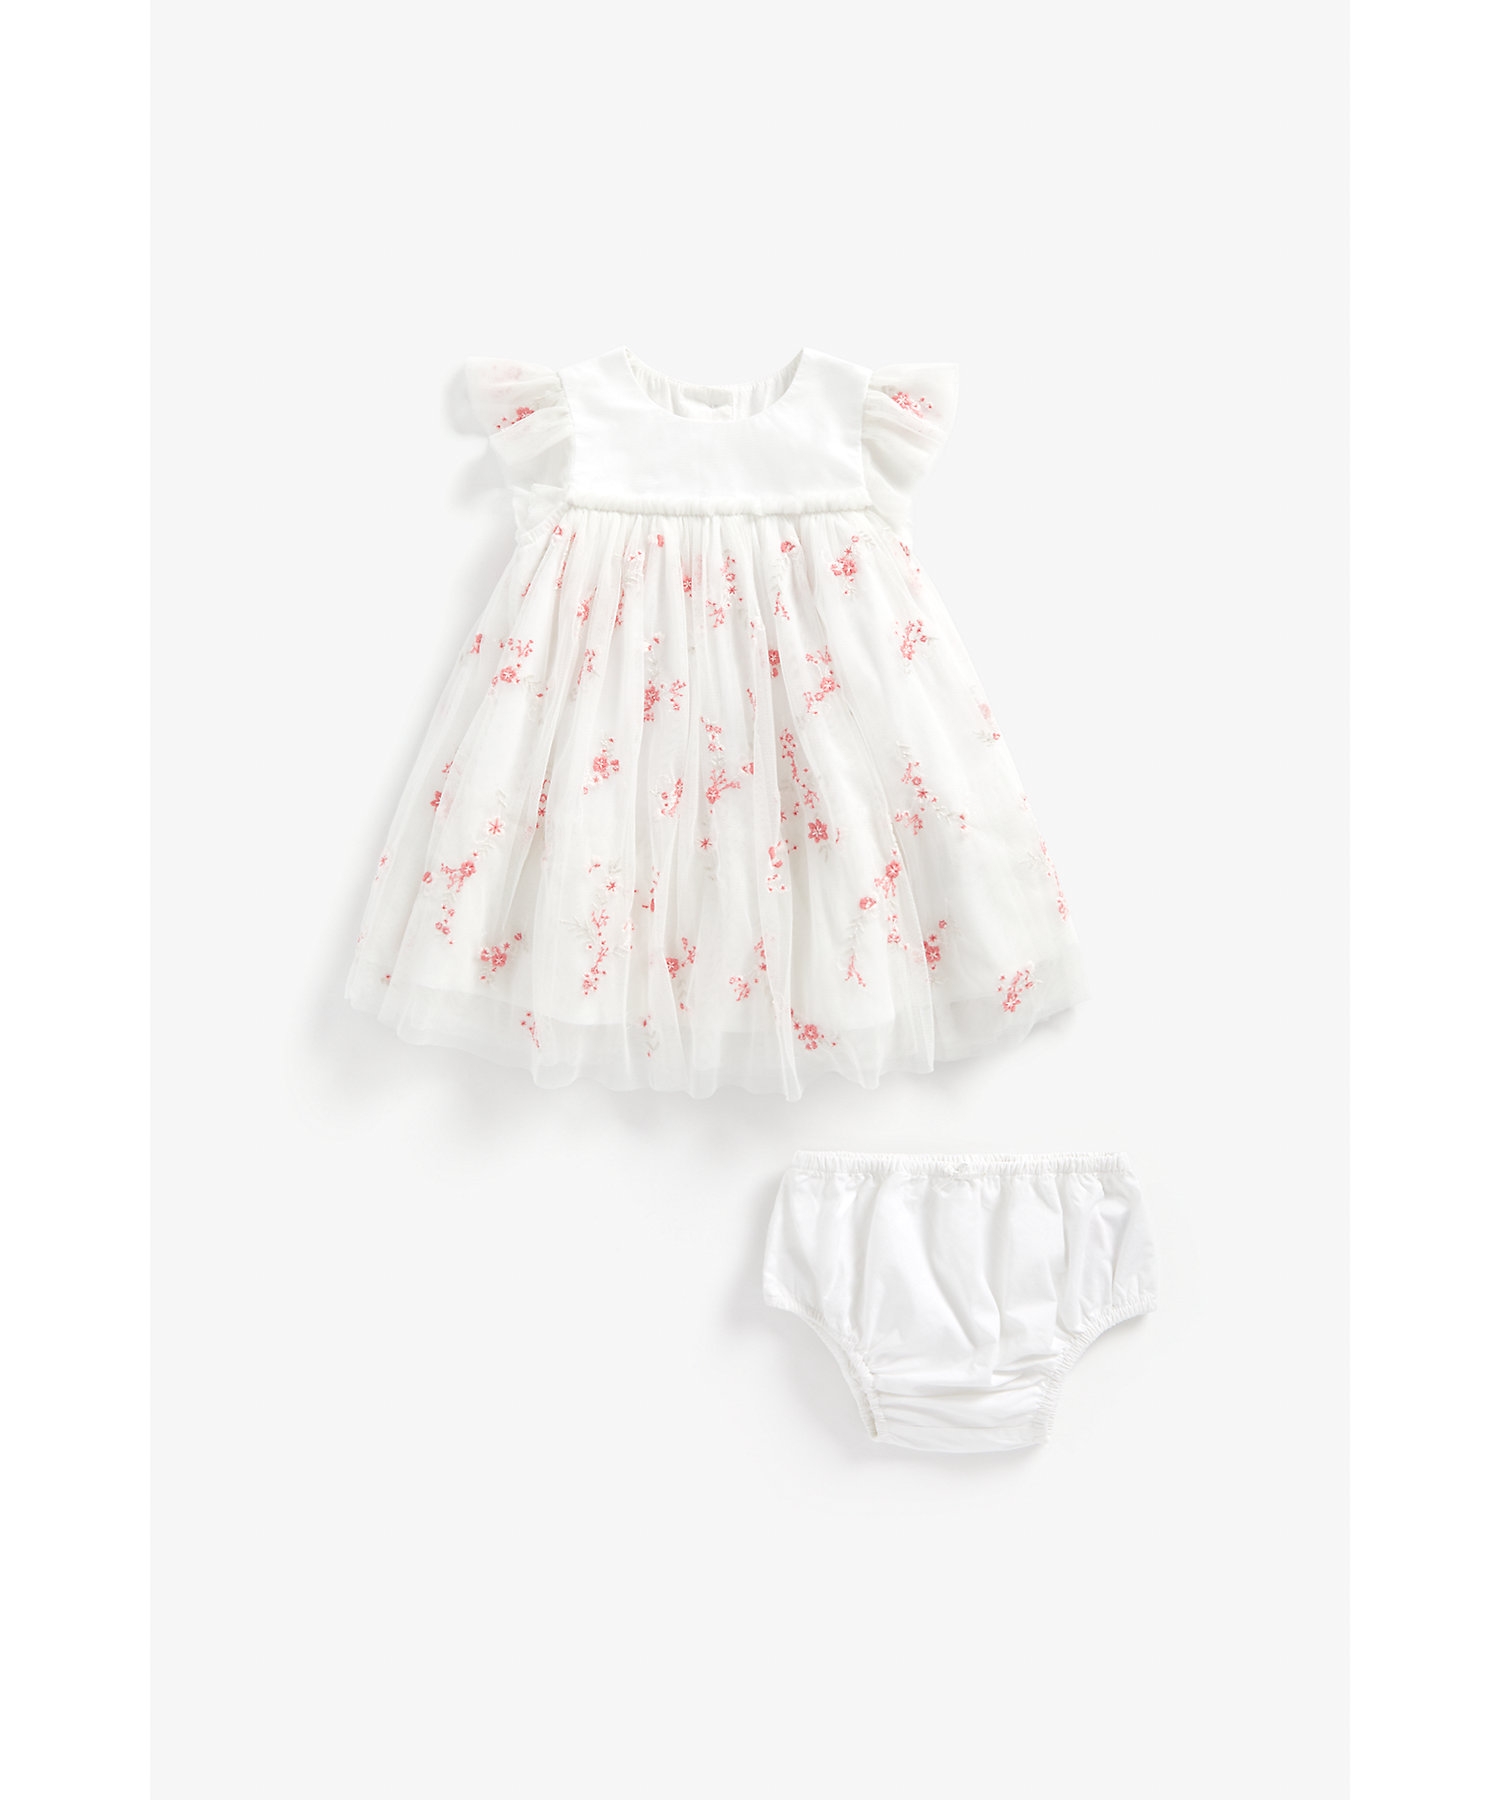 Mothercare | Girls Half Sleeves Party Dress Floral Embroidery - White